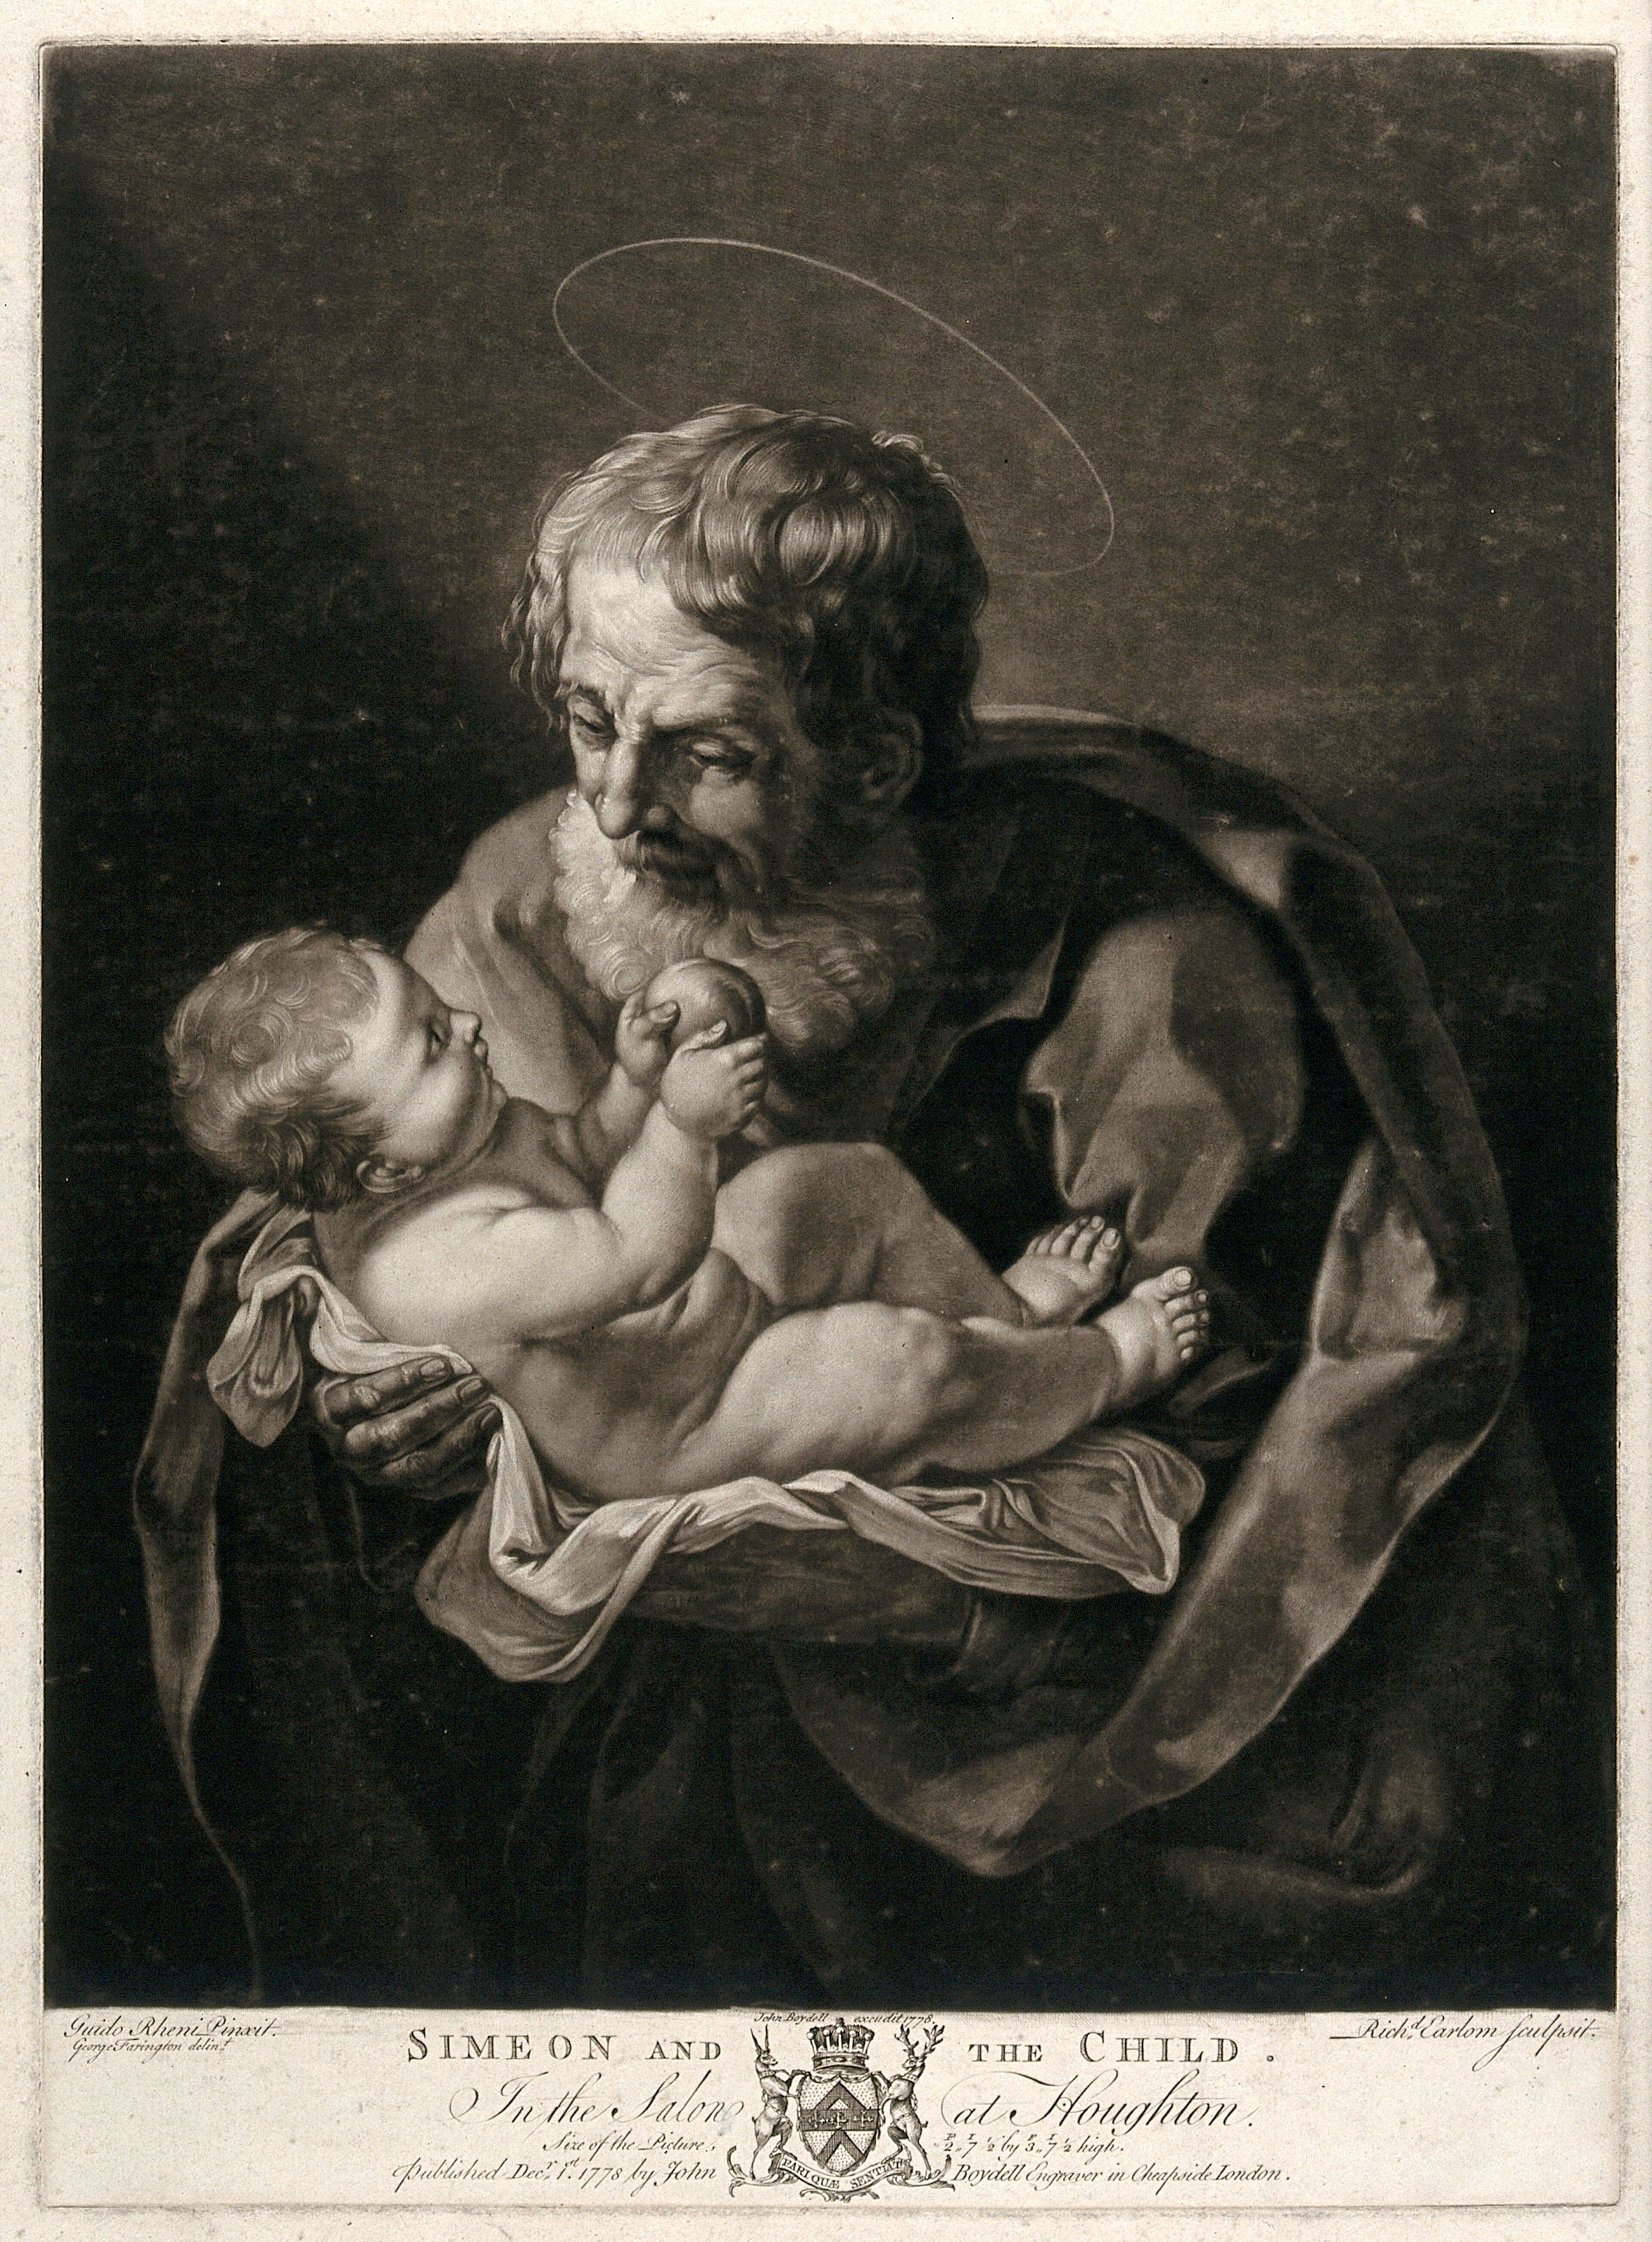 Simeon holds the Christ child, who is holding an apple. Mezzotint by R. Earlom, 1778, after G. Farington after G. Reni.